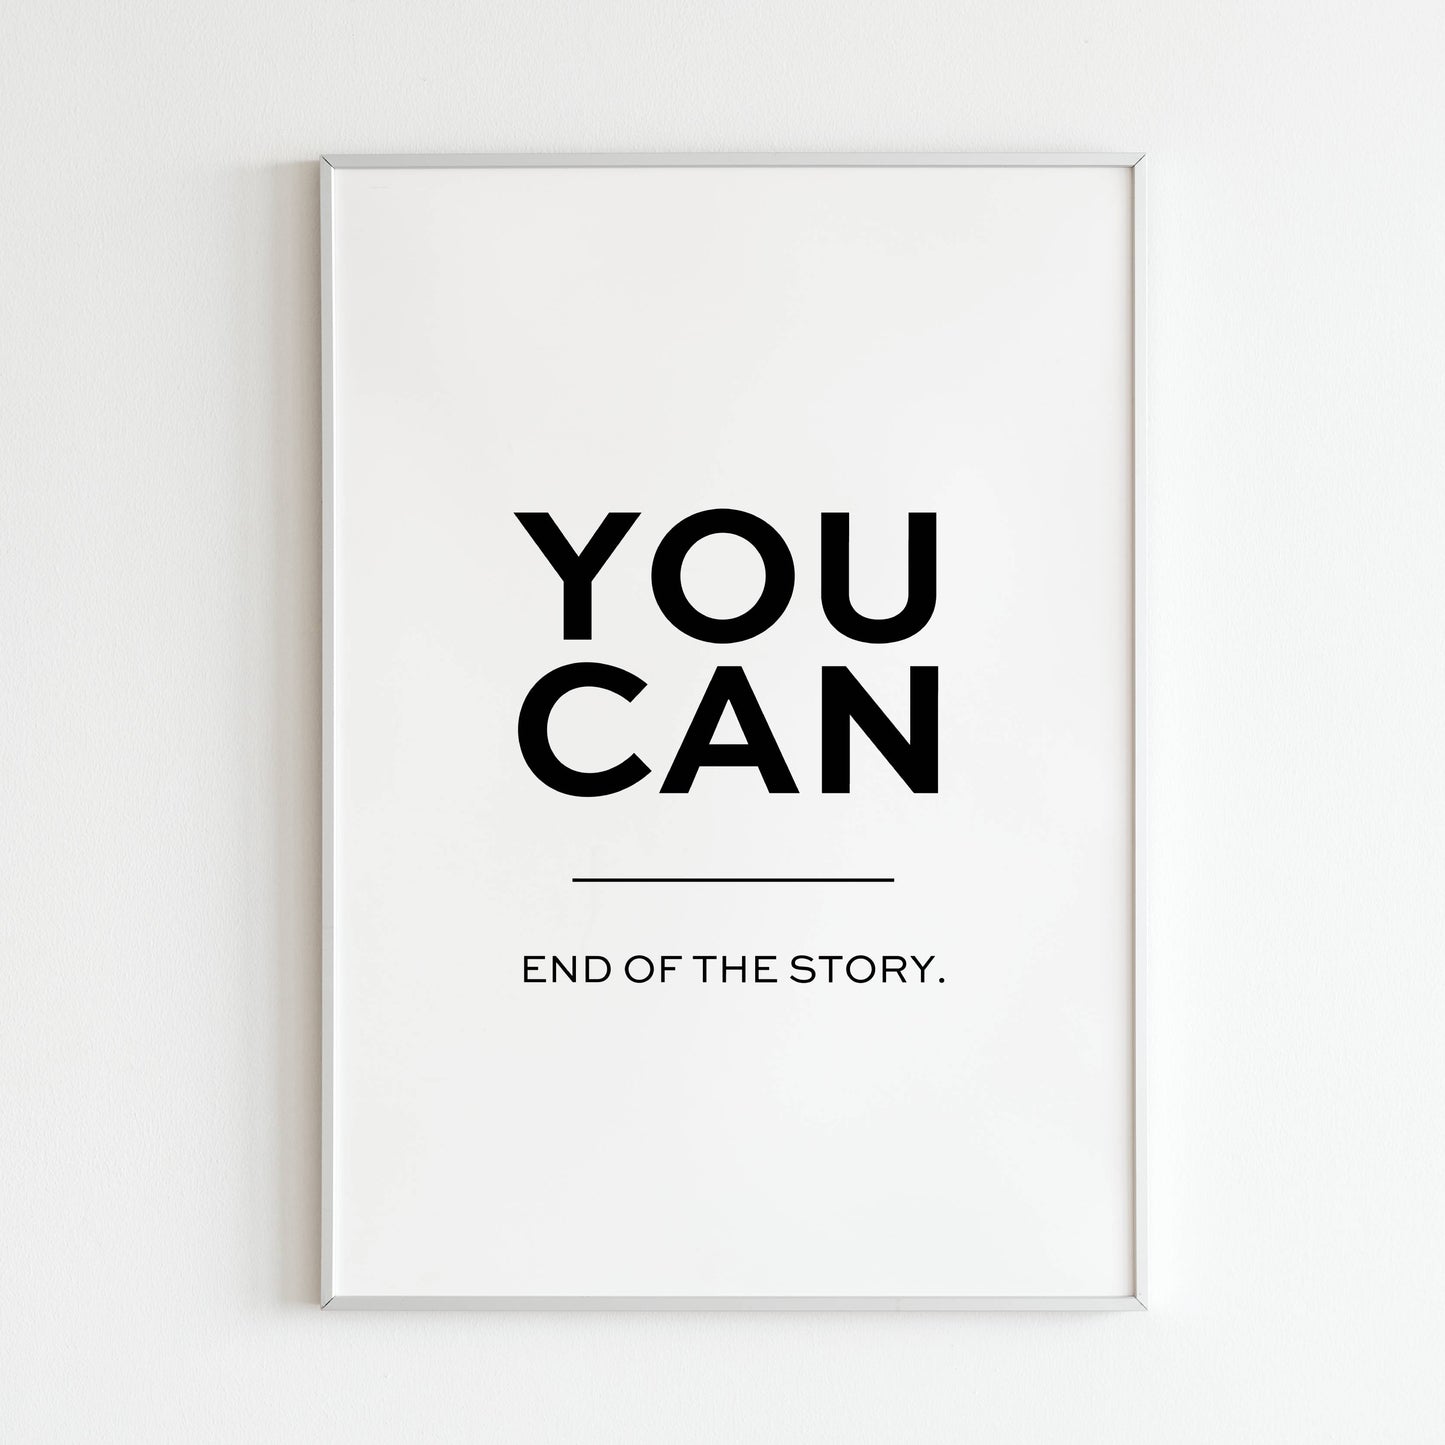 You can - End of the story - Printed Wall Art / Poster. This bold poster inspires confidence and determination. Arrives ready to hang.